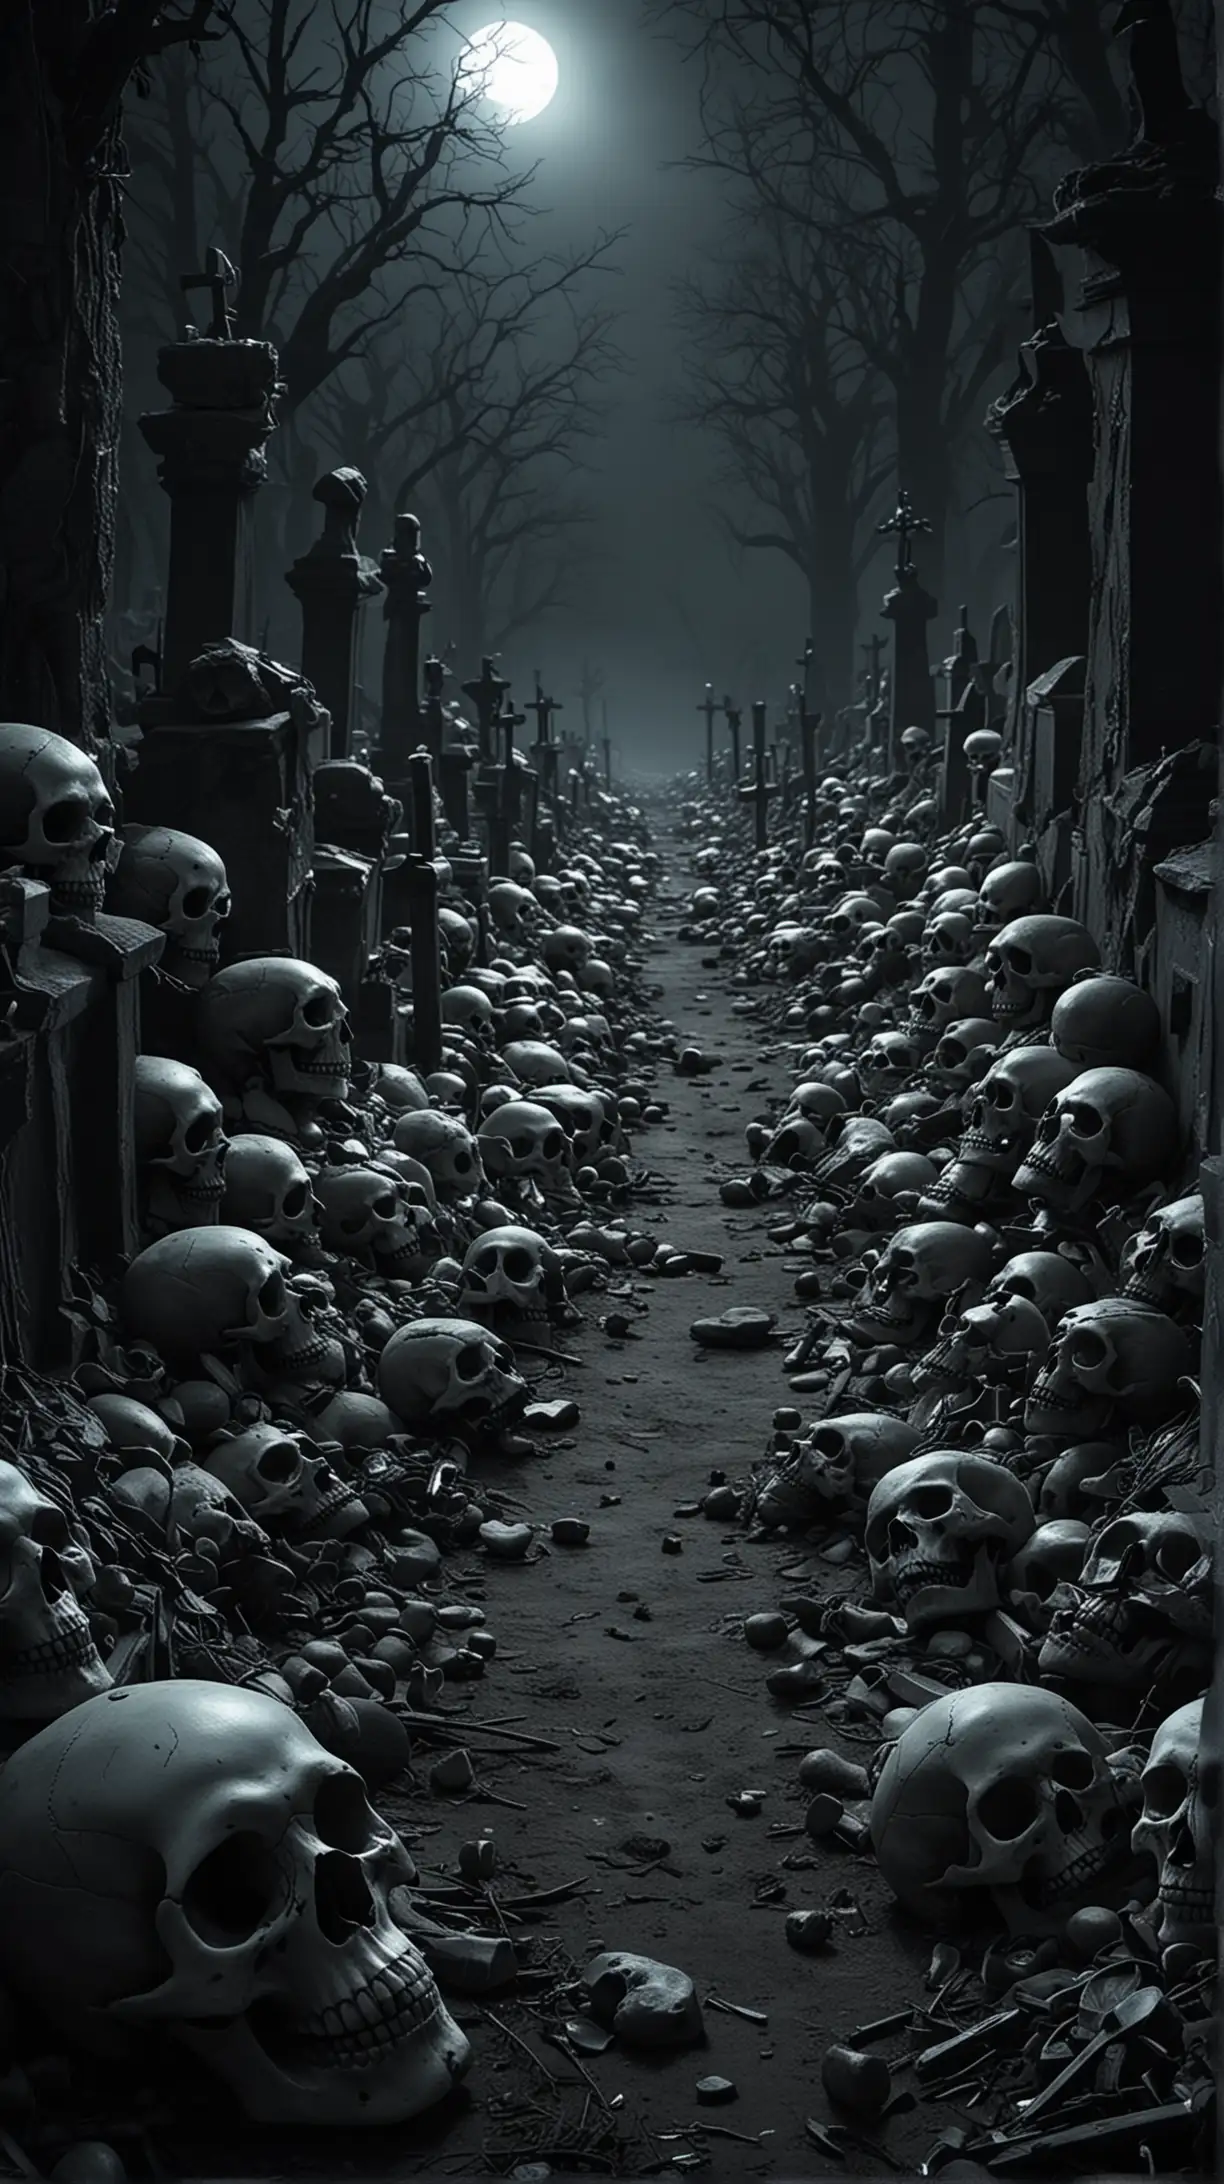 Make a mysterious and scary place, place full of skulls, cemetery of skulls, make it dark, very clear picture, 4k quality picture